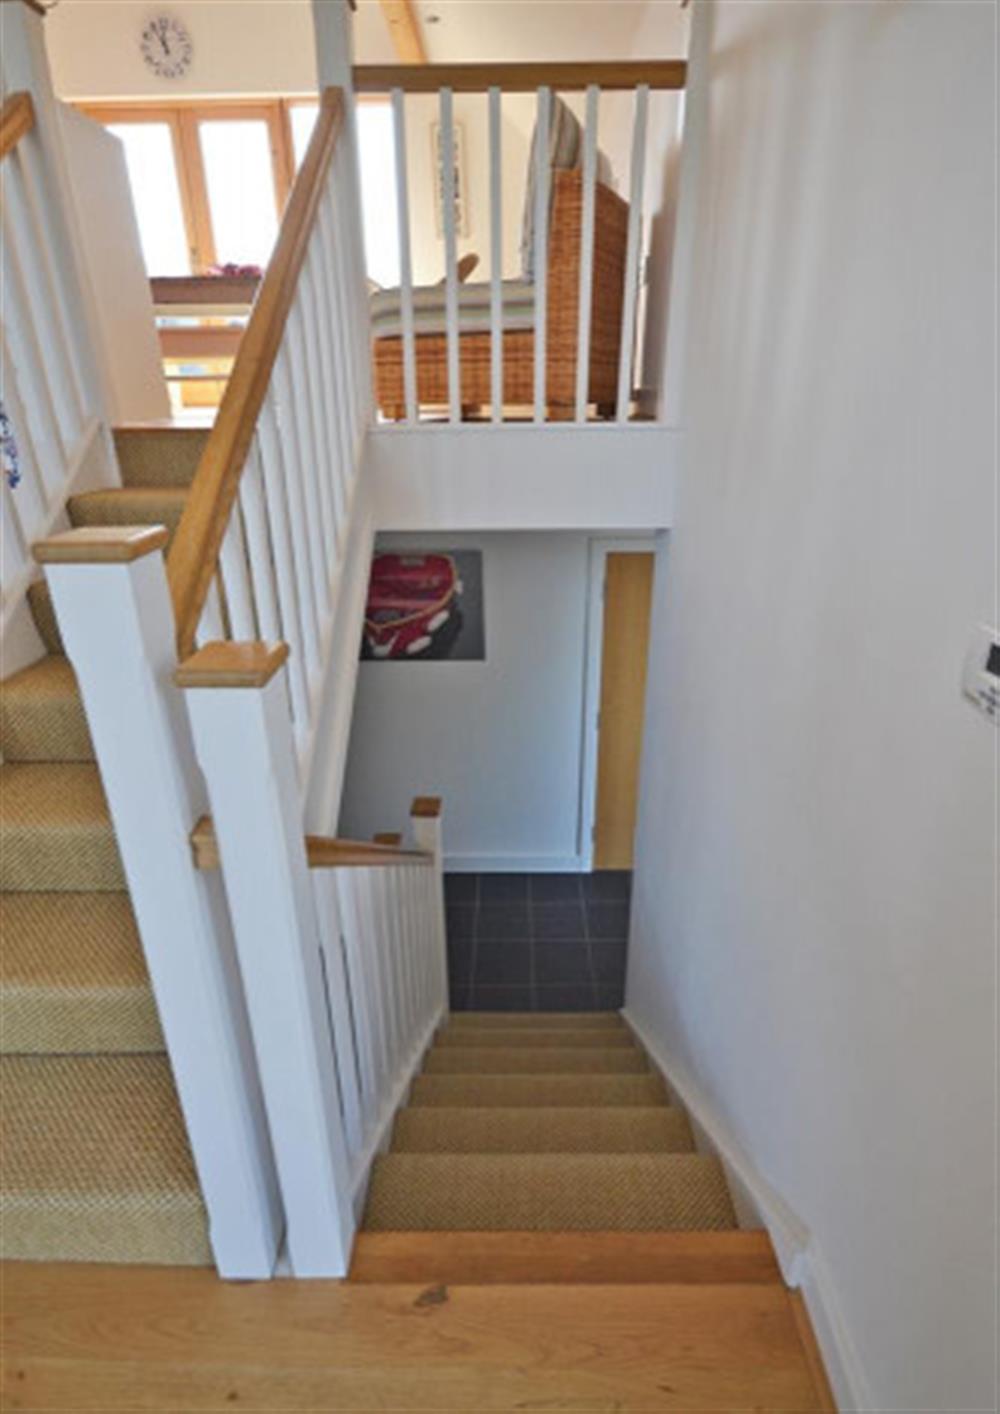 Stair well down to bedrooms at 28 Talland Bay in Looe